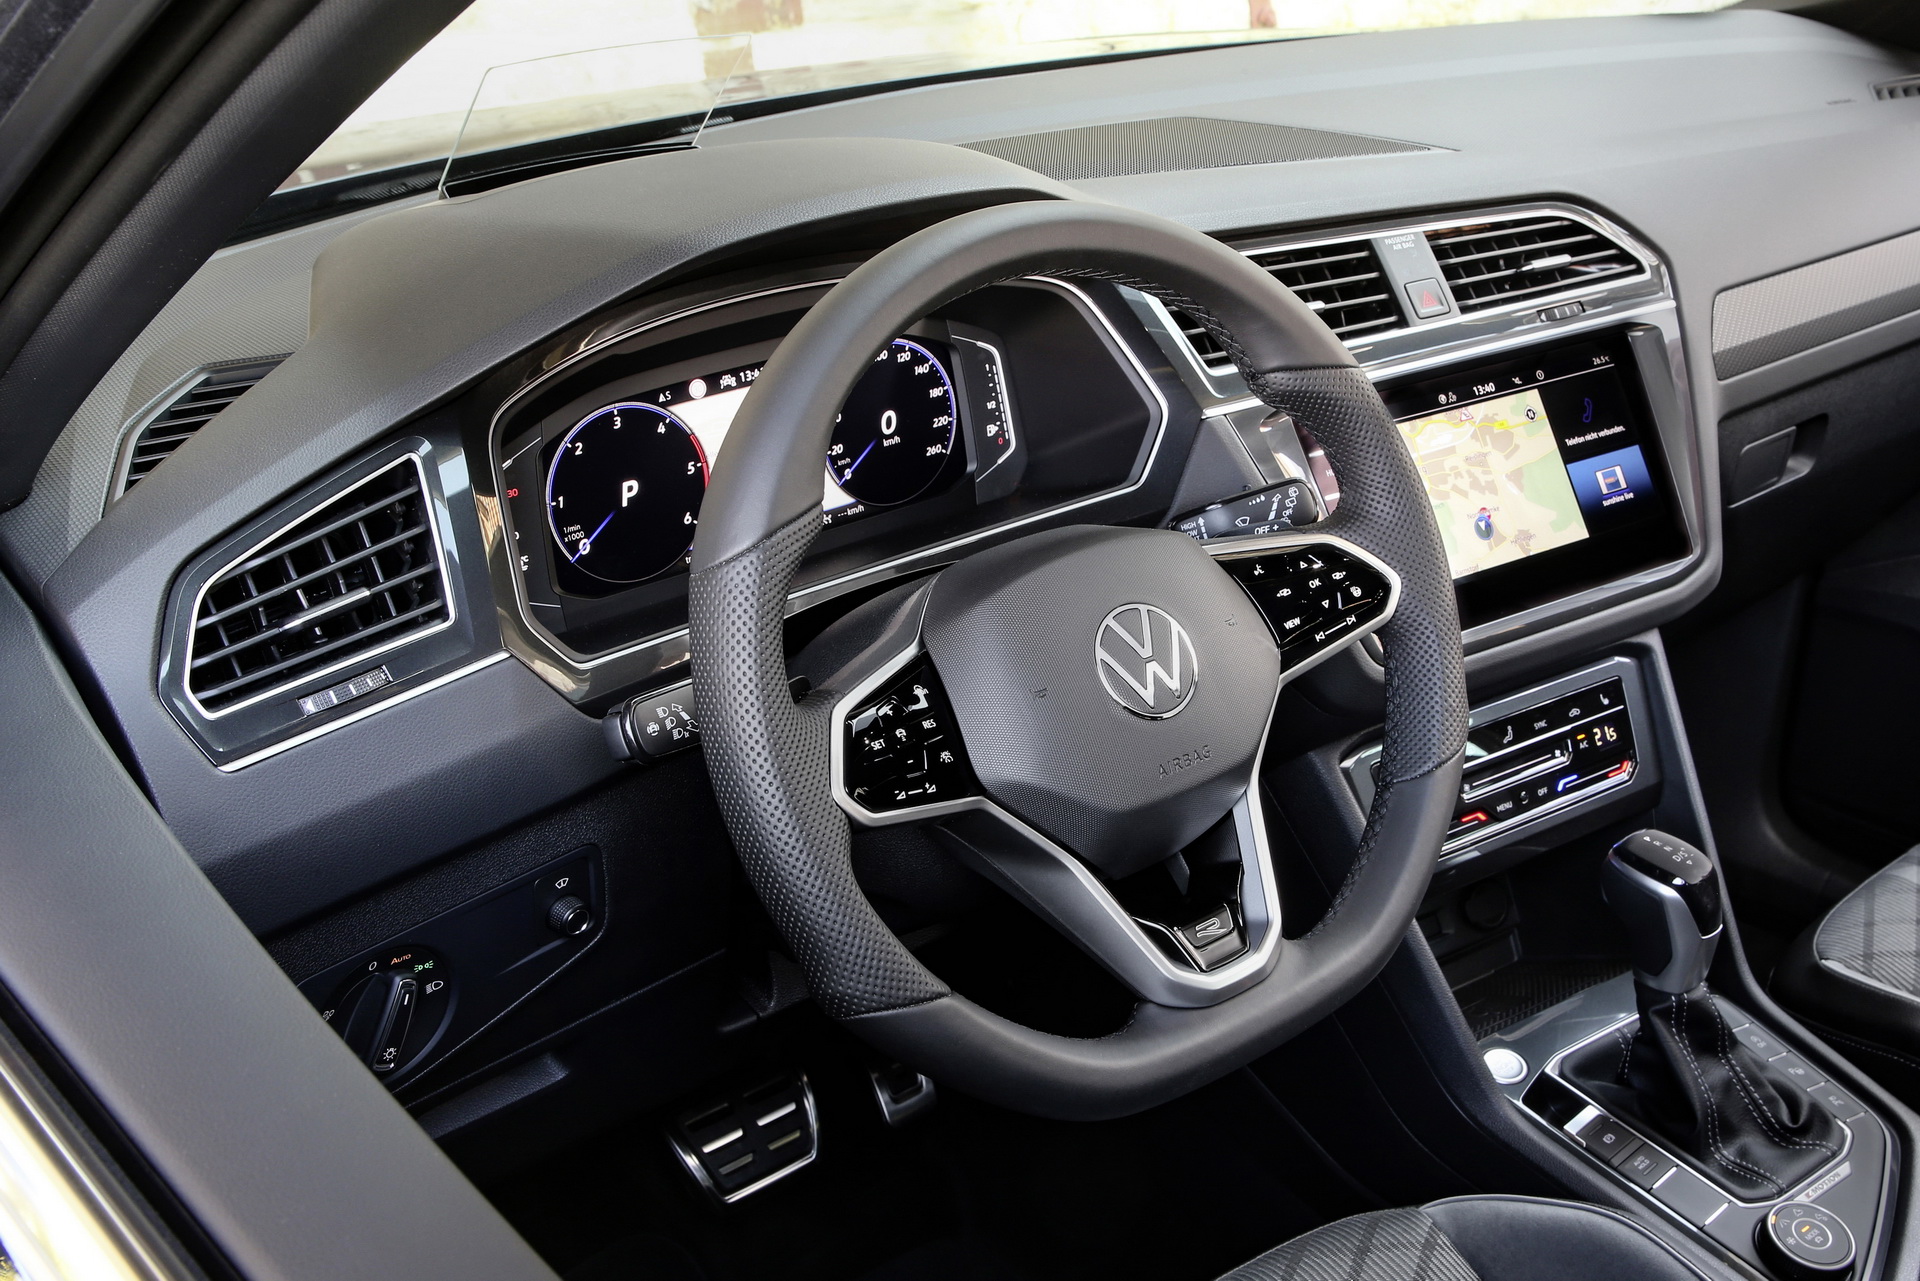 VW Tiguan Packages & Accessories | Sunroof, Third-Row Seating & More